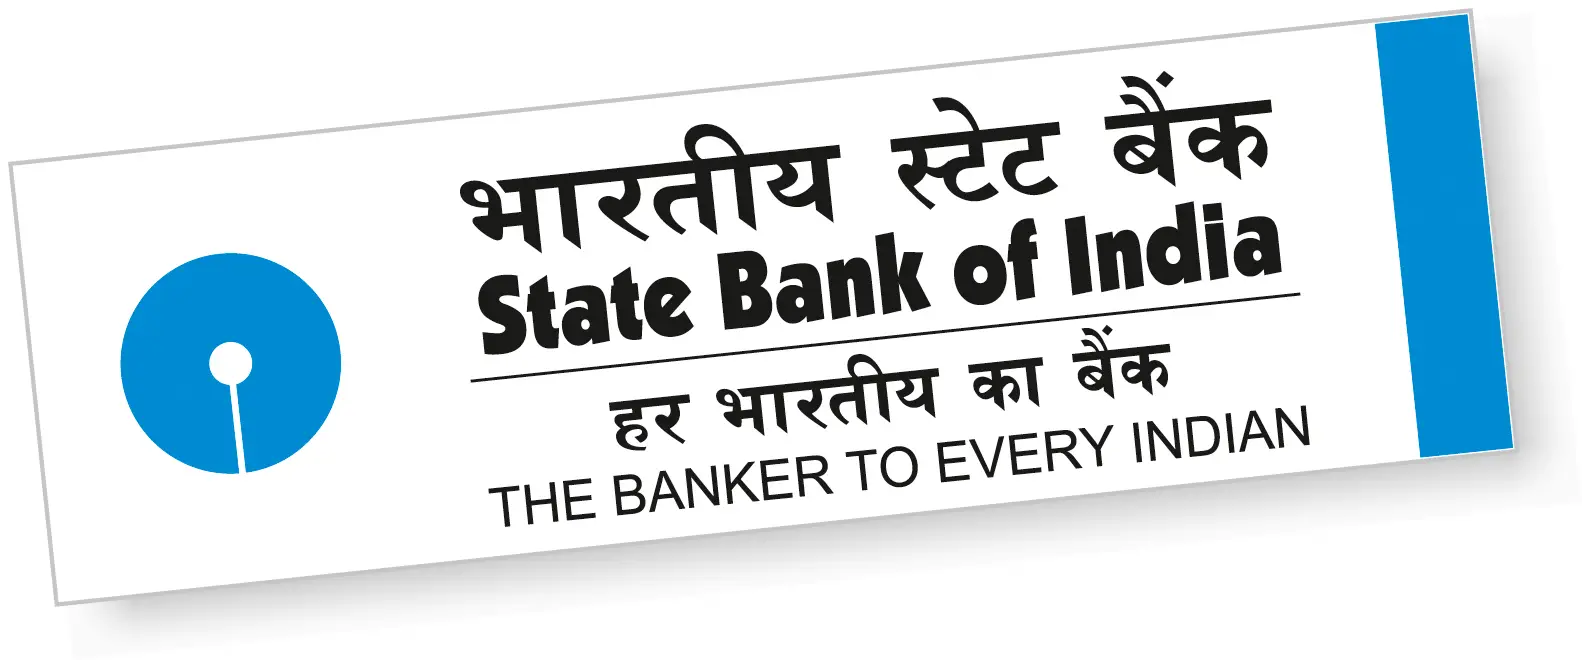 How to Check State Bank of India (SBI) Account Balance